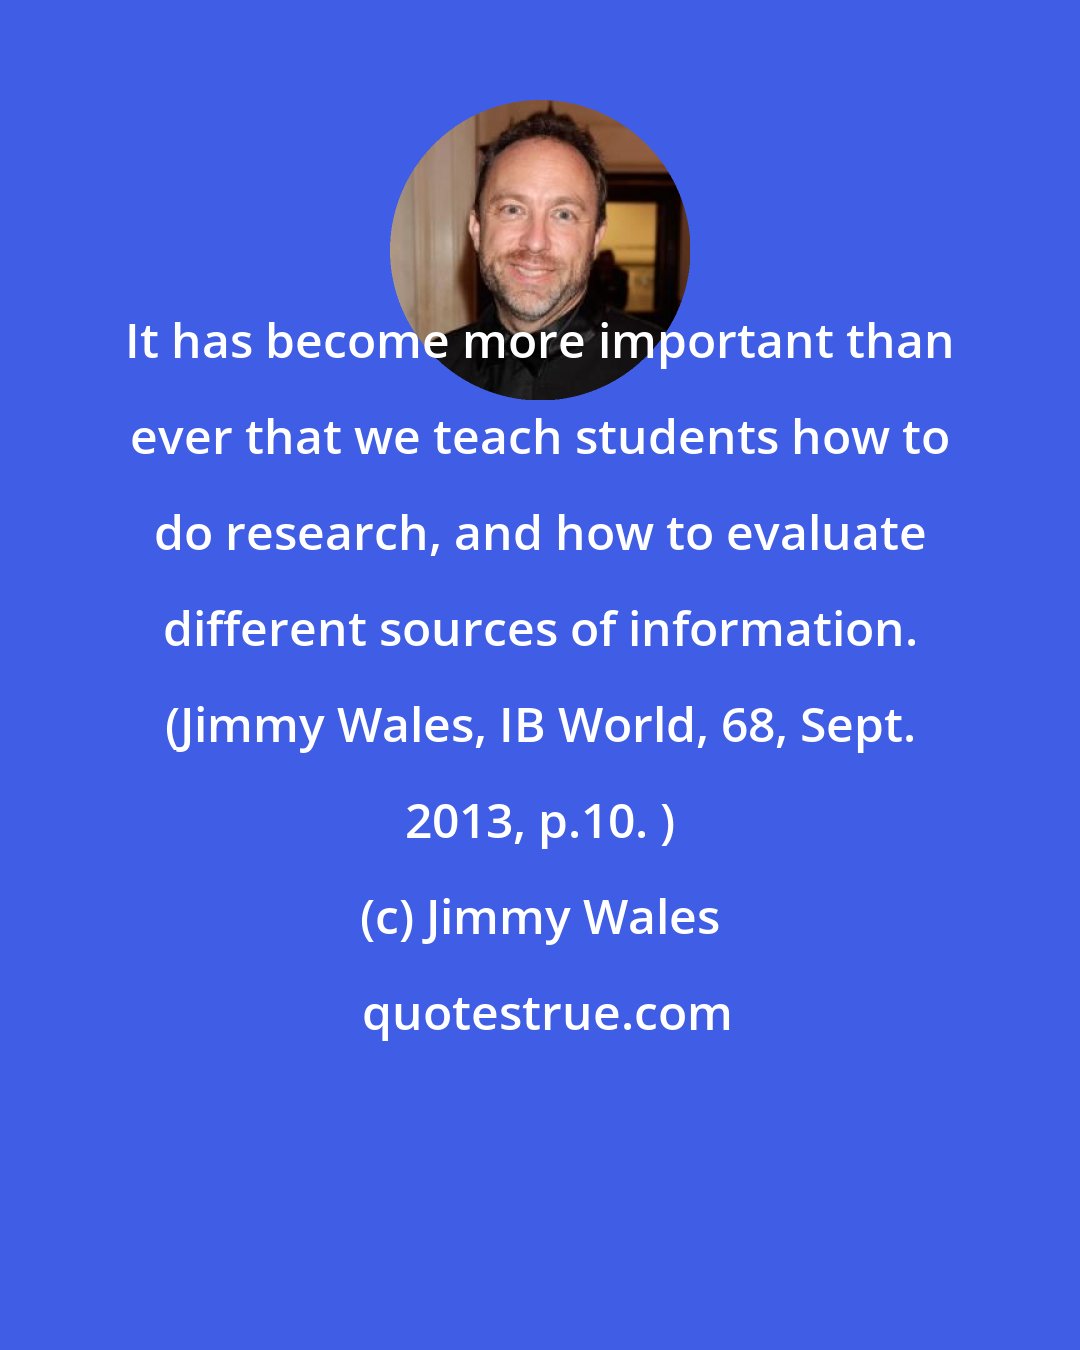 Jimmy Wales: It has become more important than ever that we teach students how to do research, and how to evaluate different sources of information. (Jimmy Wales, IB World, 68, Sept. 2013, p.10. )